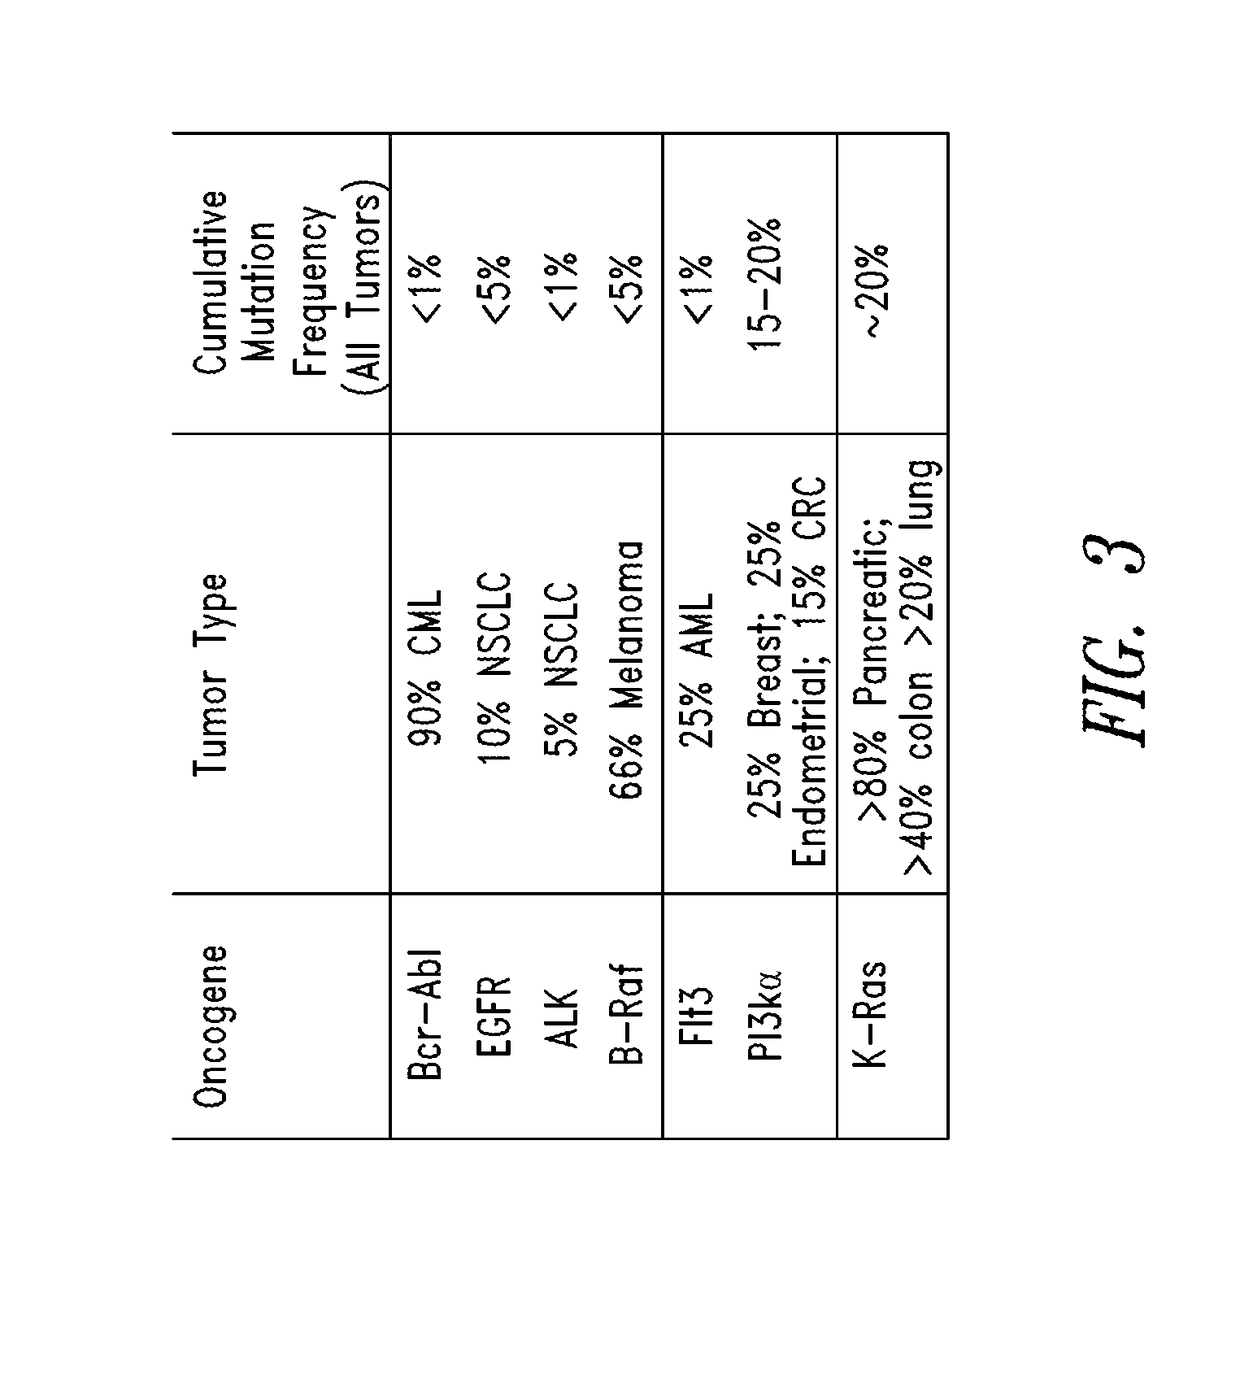 Fused-tricyclic inhibitors of kras and methods of use thereof